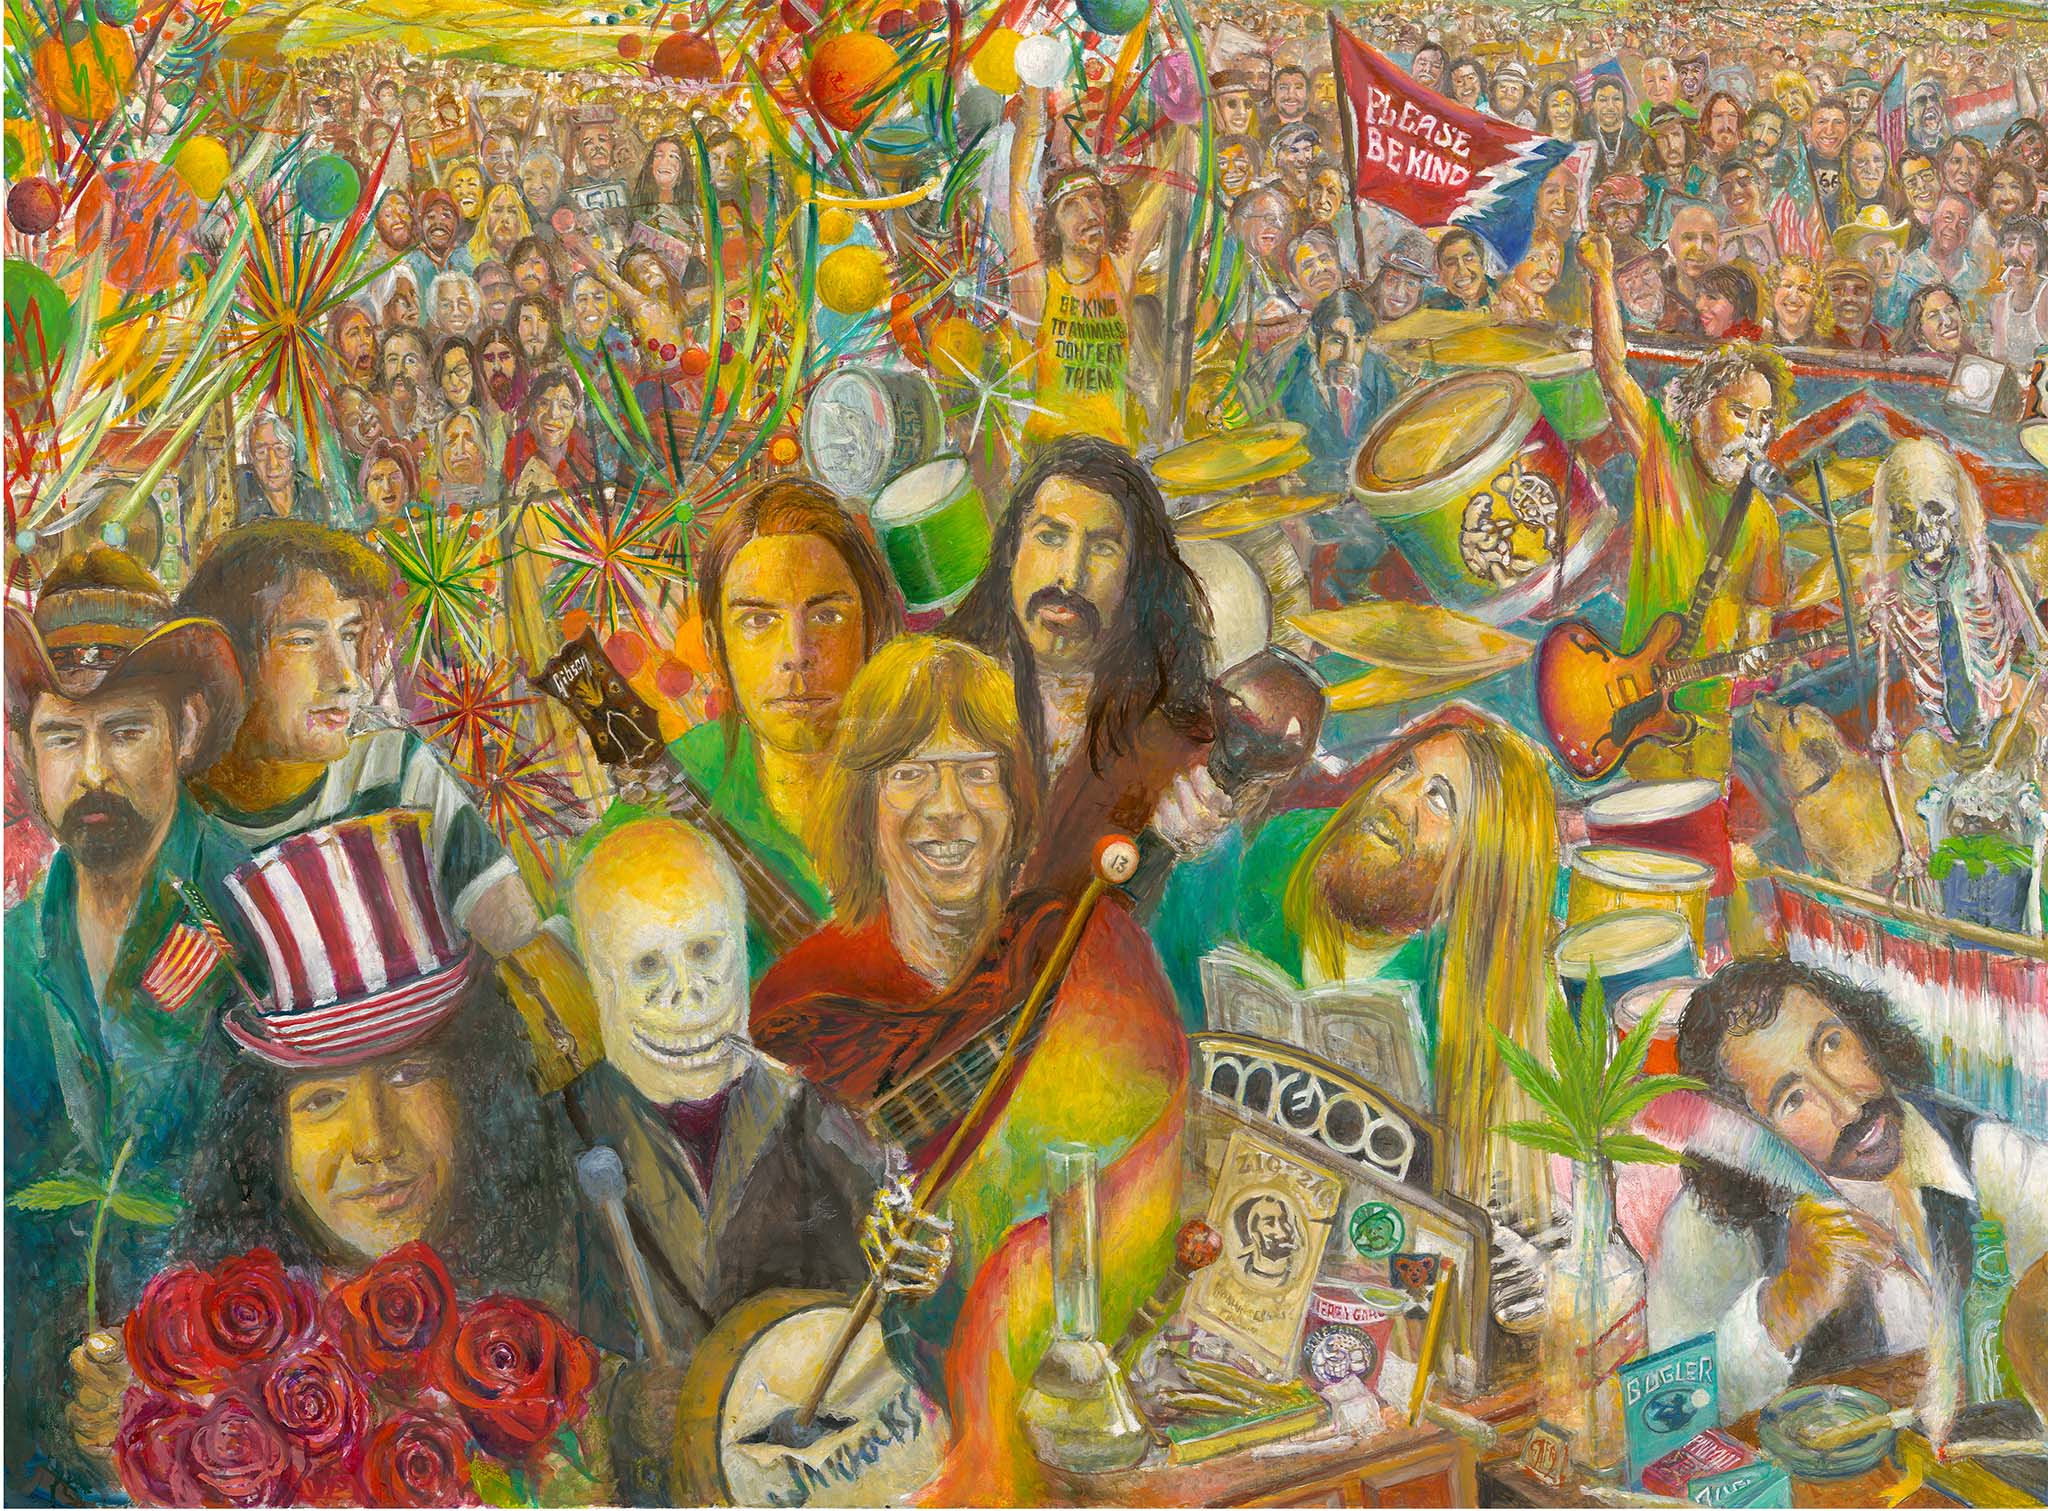 Headcount Voting Democracy Grateful Dead 1965-Forever So Many Roads Robert Cenedella Triptych Art Vote Democrats Republicans Libertarians Green Party Posters Digital Prints Digital Archival Prints Framed